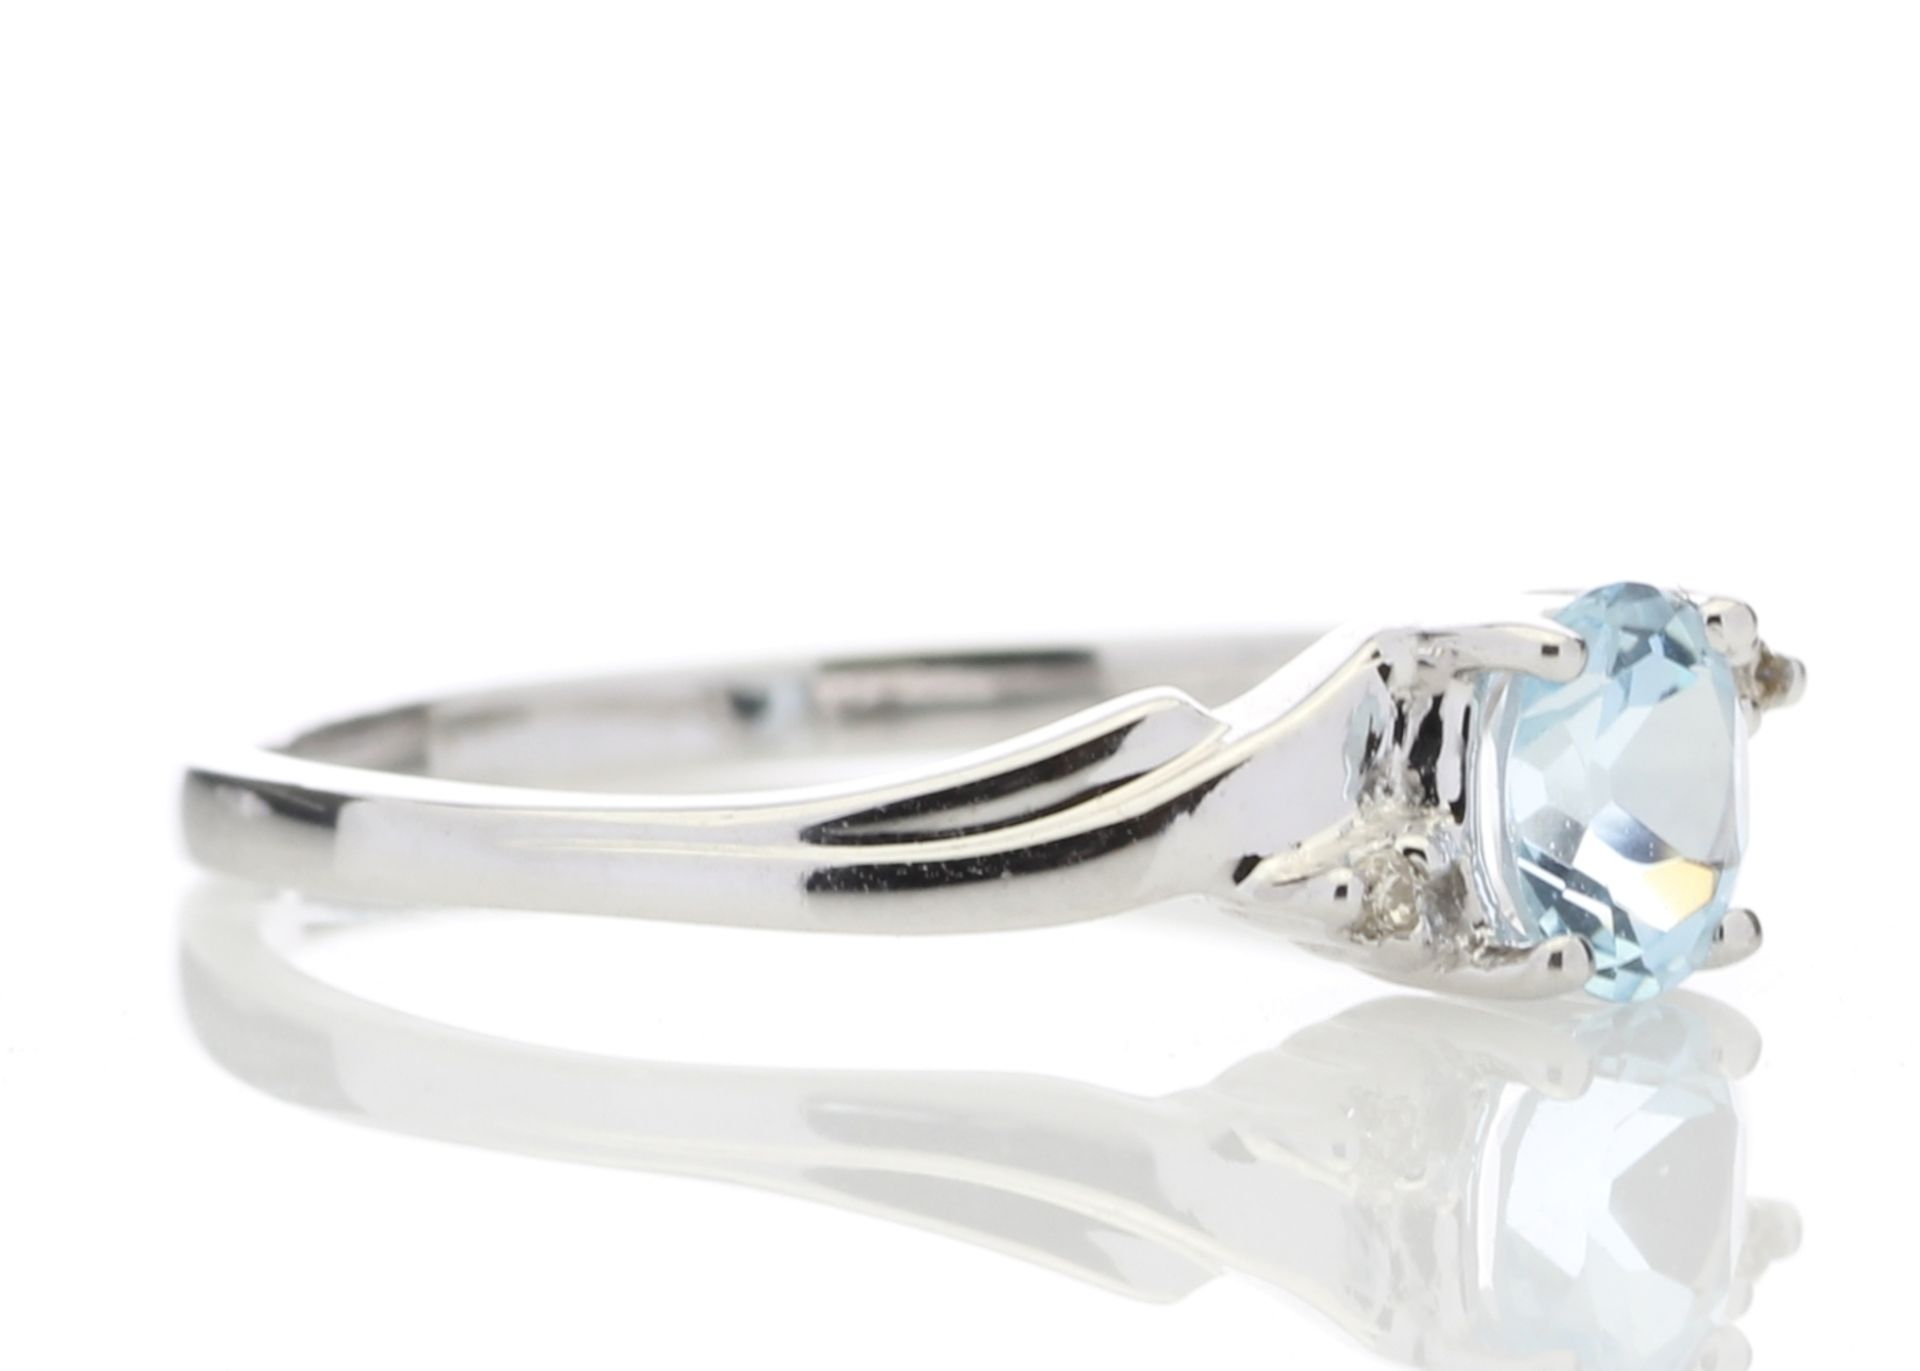 9ct White Gold Diamond and Blue Topaz Ring 0.01 Carats - Valued by GIE £755.00 - This ring - Image 4 of 9